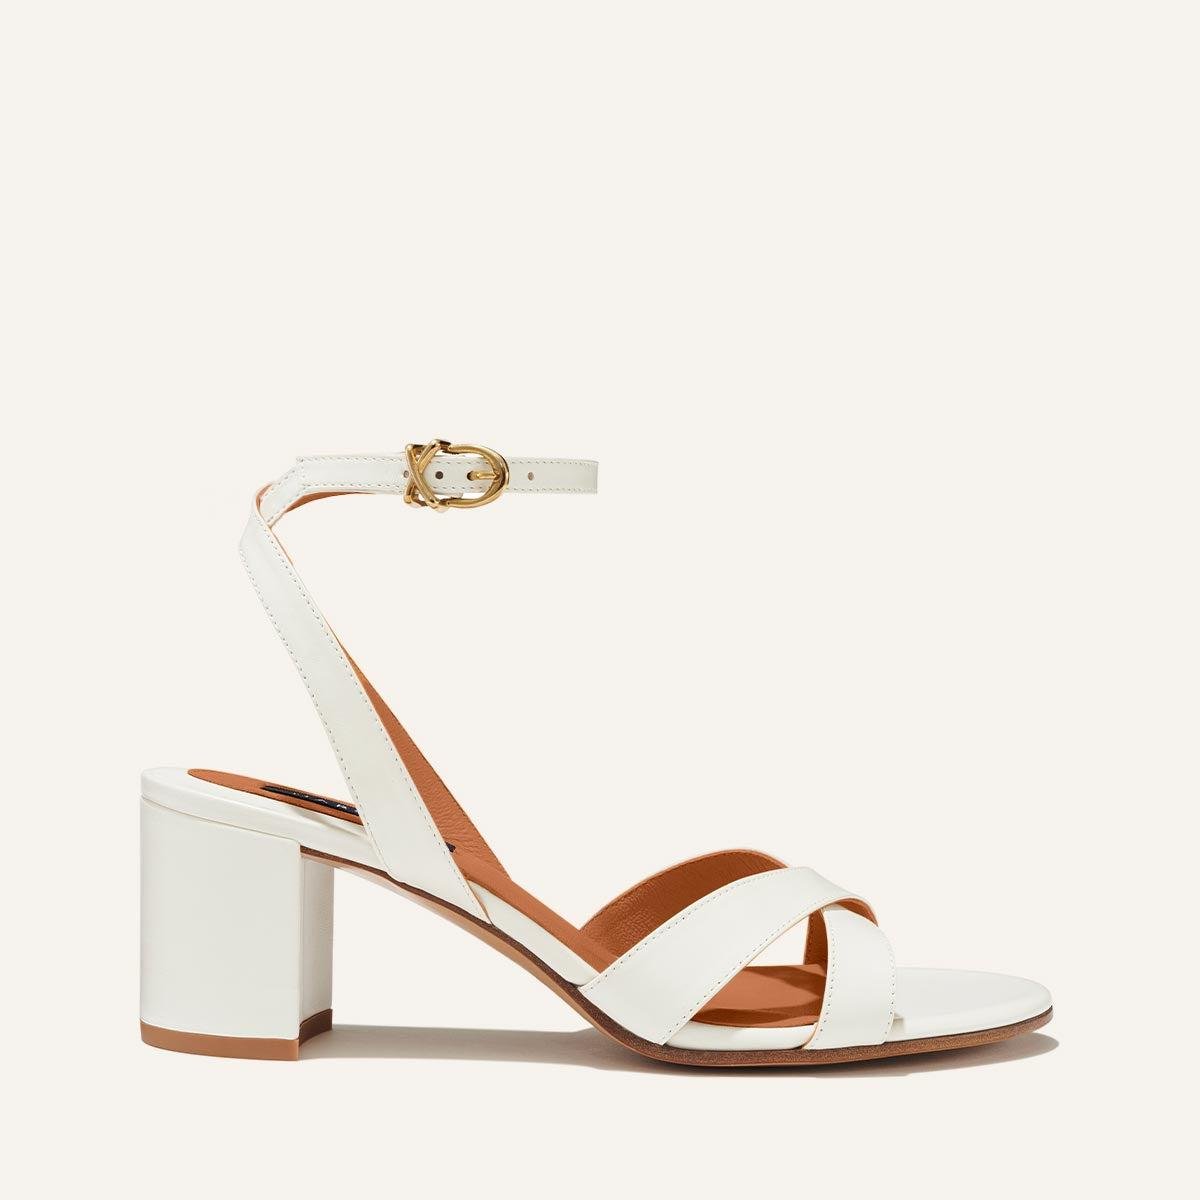 The City Sandal - Ivory Nappa by MARGAUX